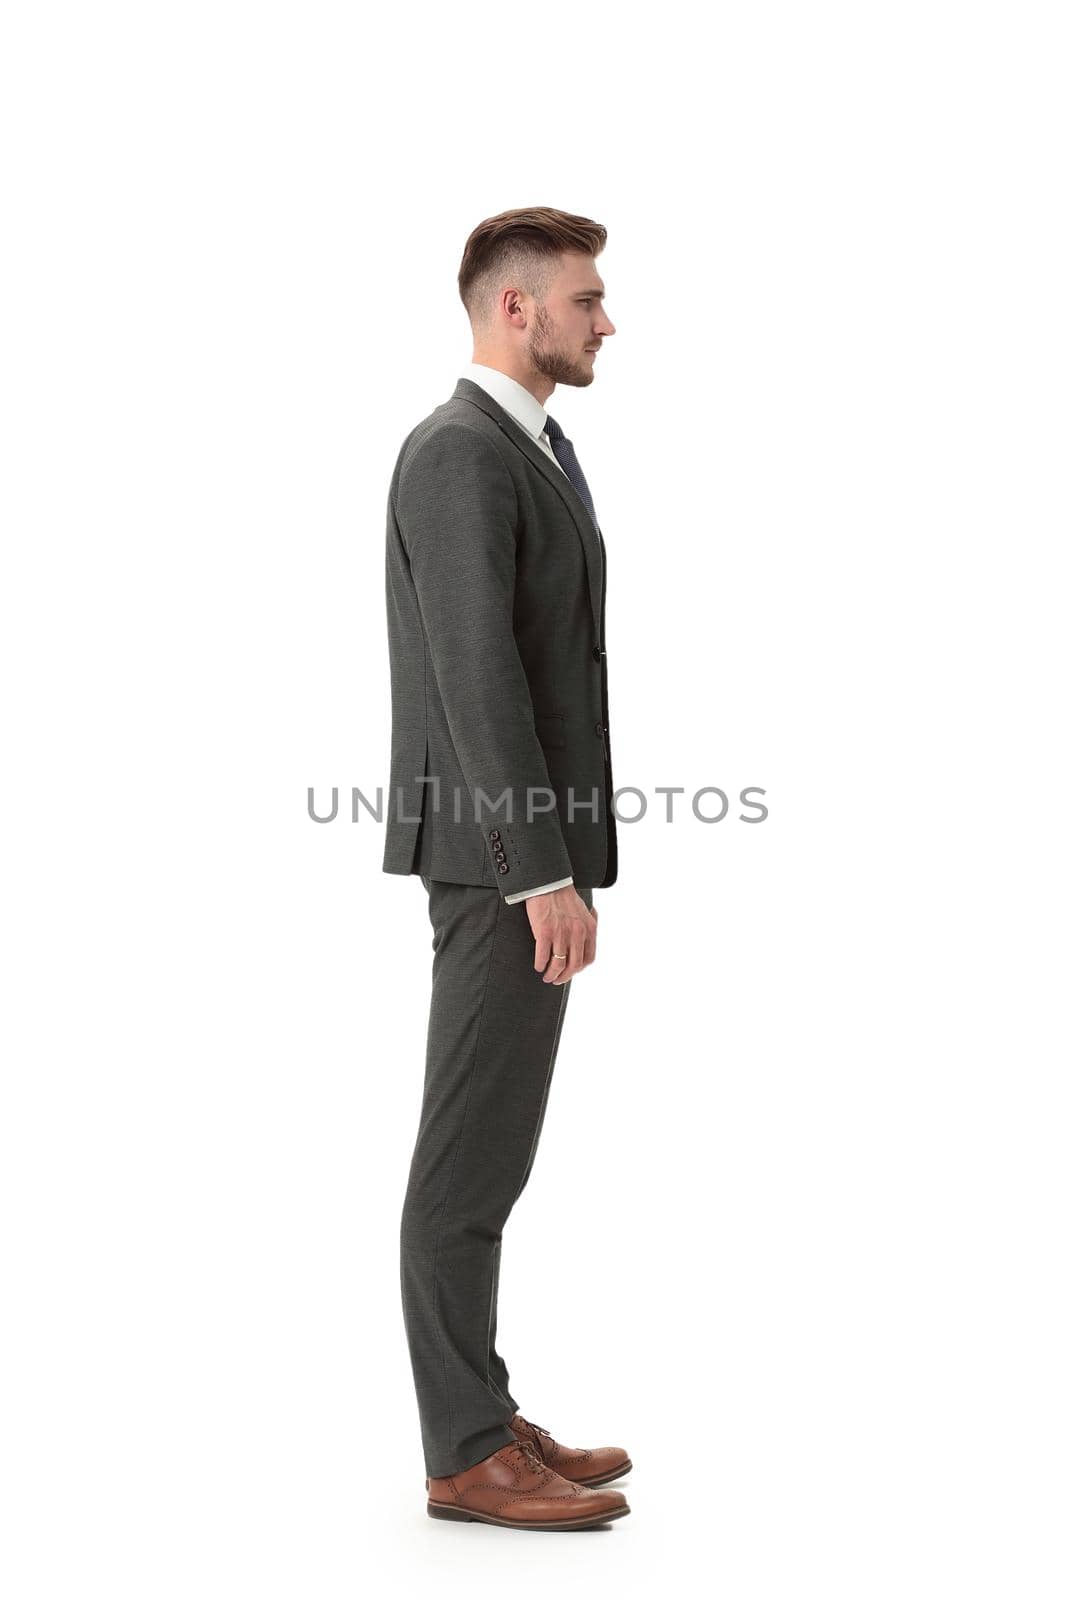 side view.portrait in full growth. confident businessman.business people